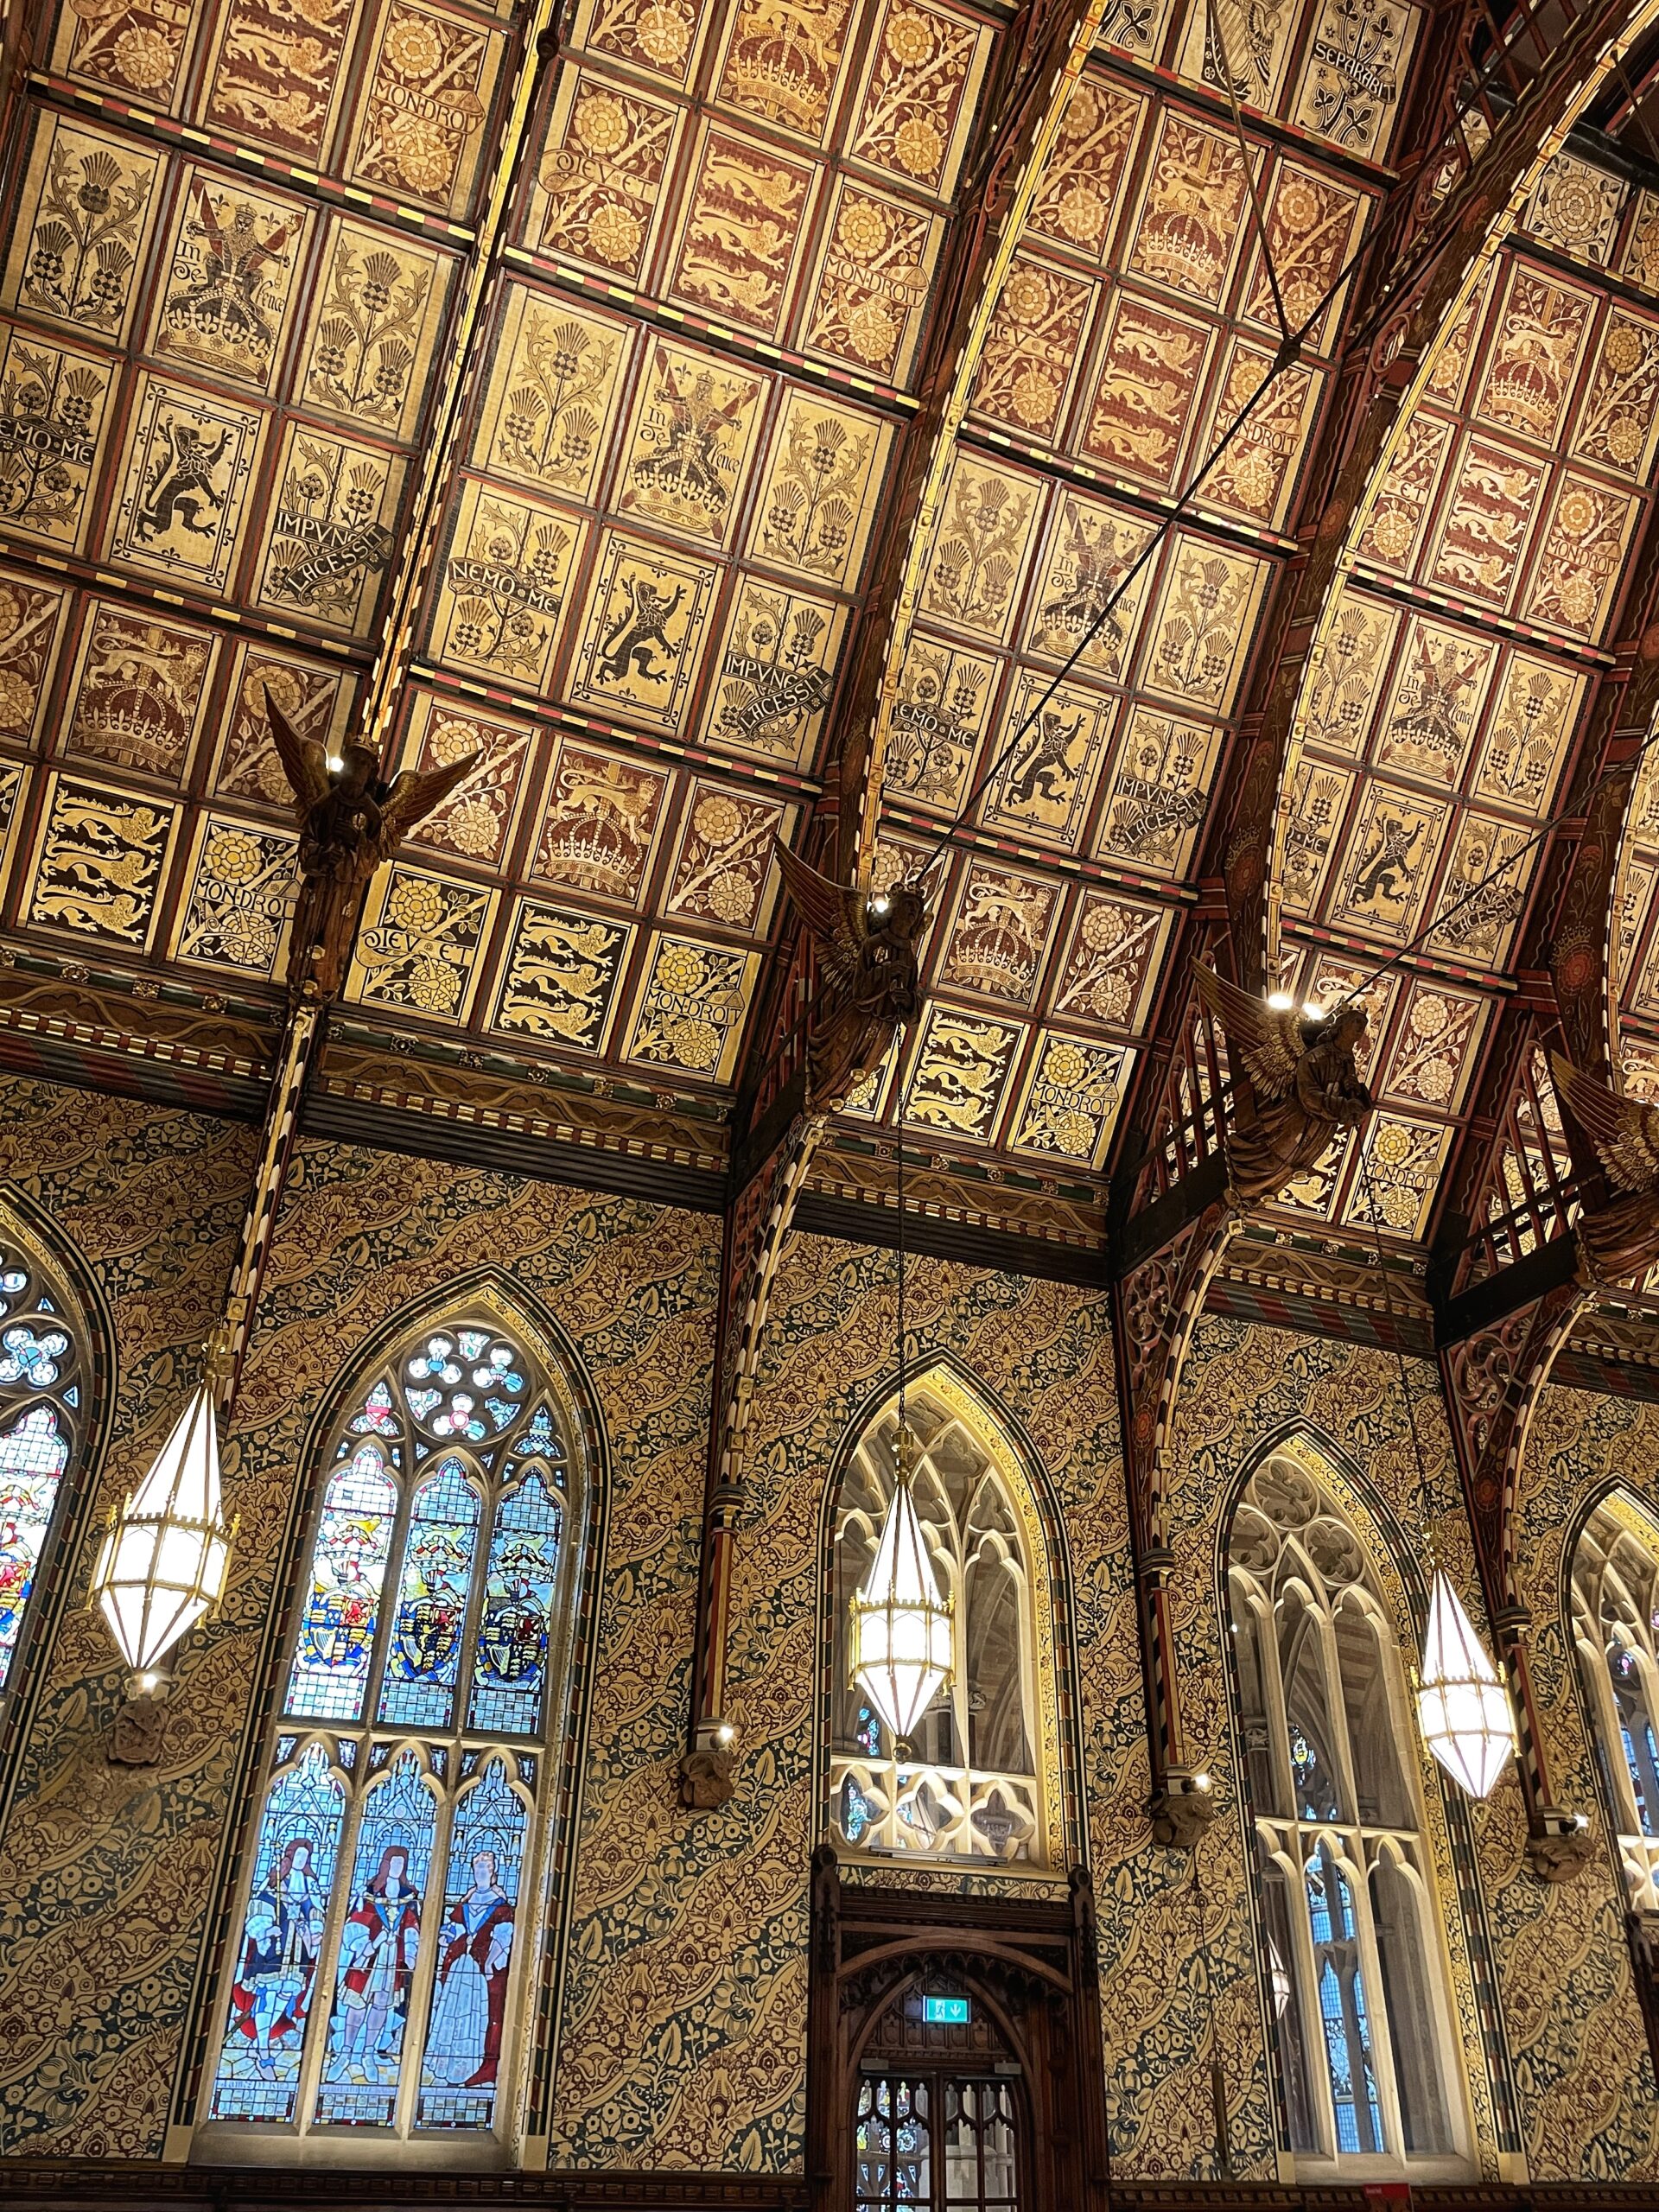 The incredible hand-painted ceiling panels in the Great Hall at Rochdale Town Hall